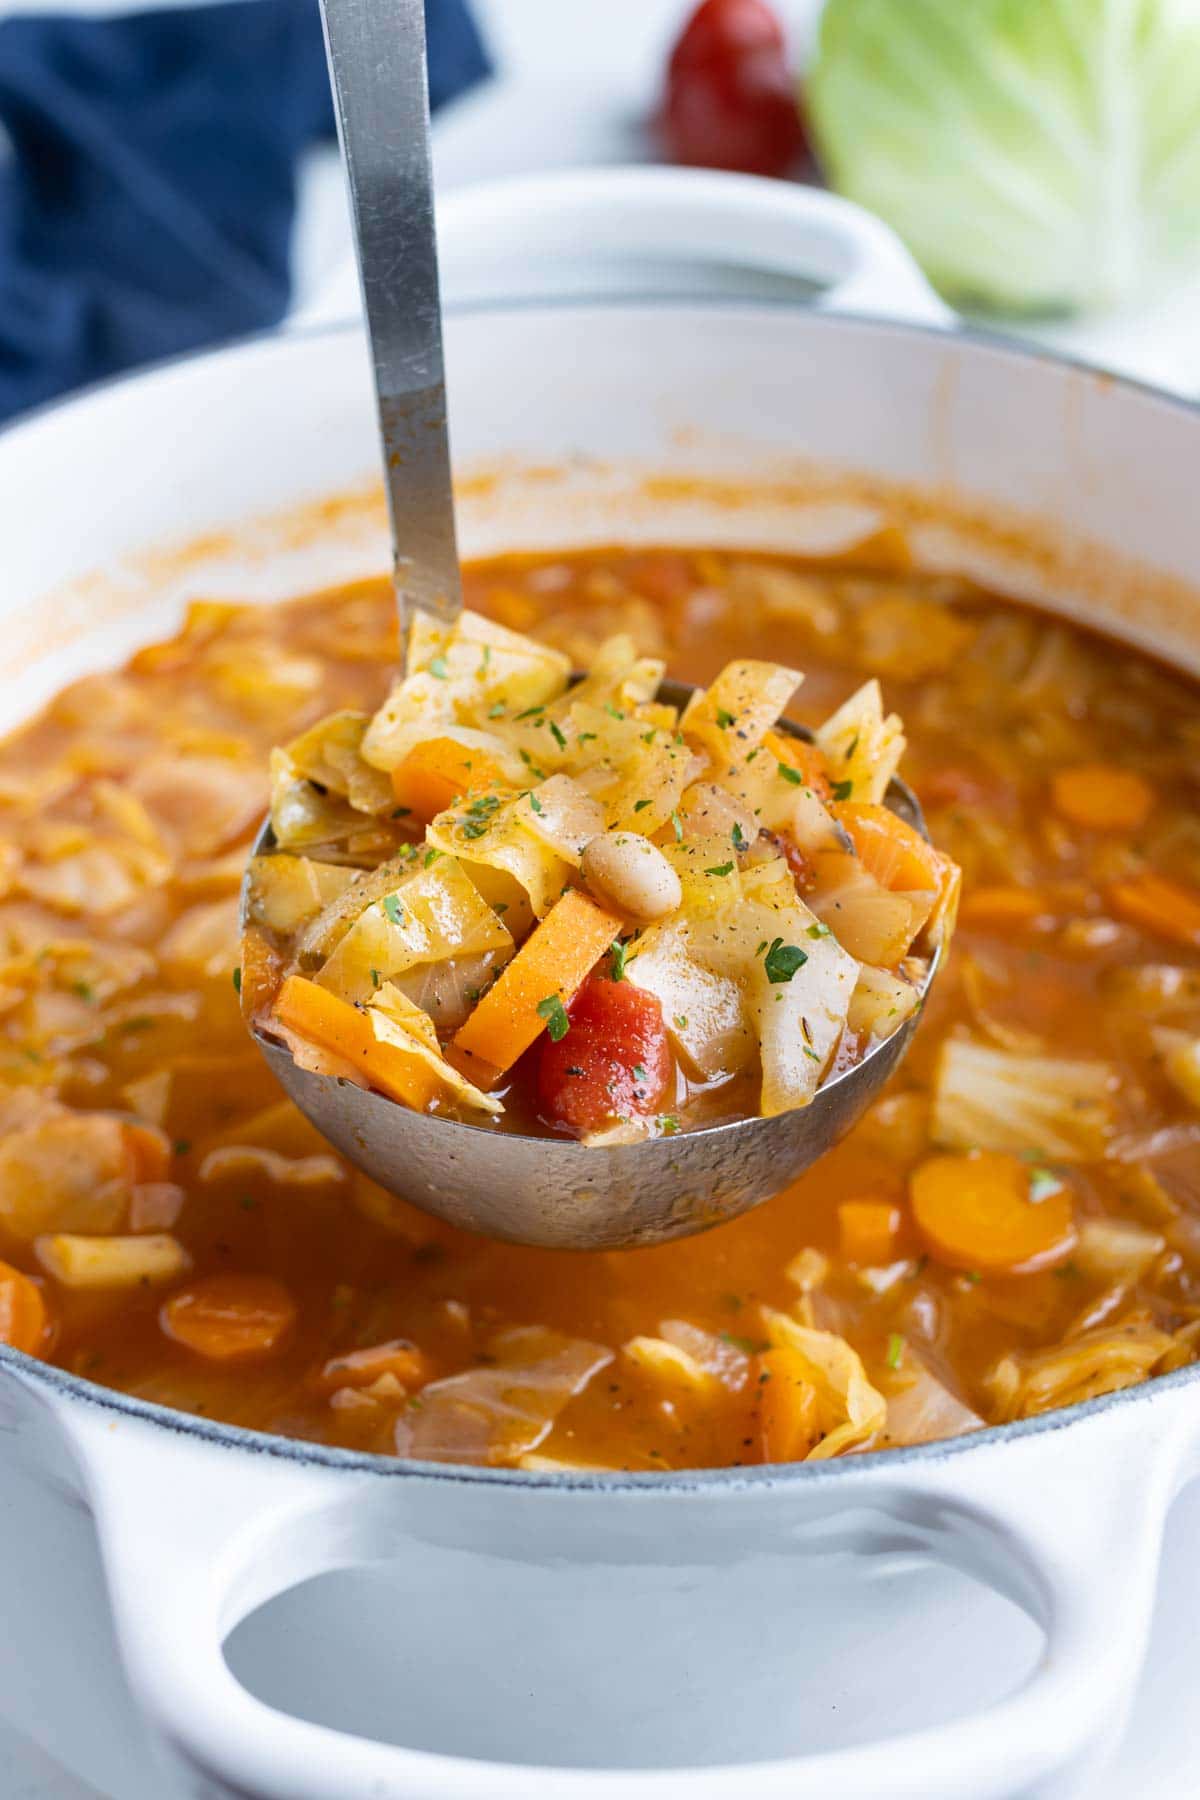 A ladle full of cabbage soup is served for a healthy vegan dinner.